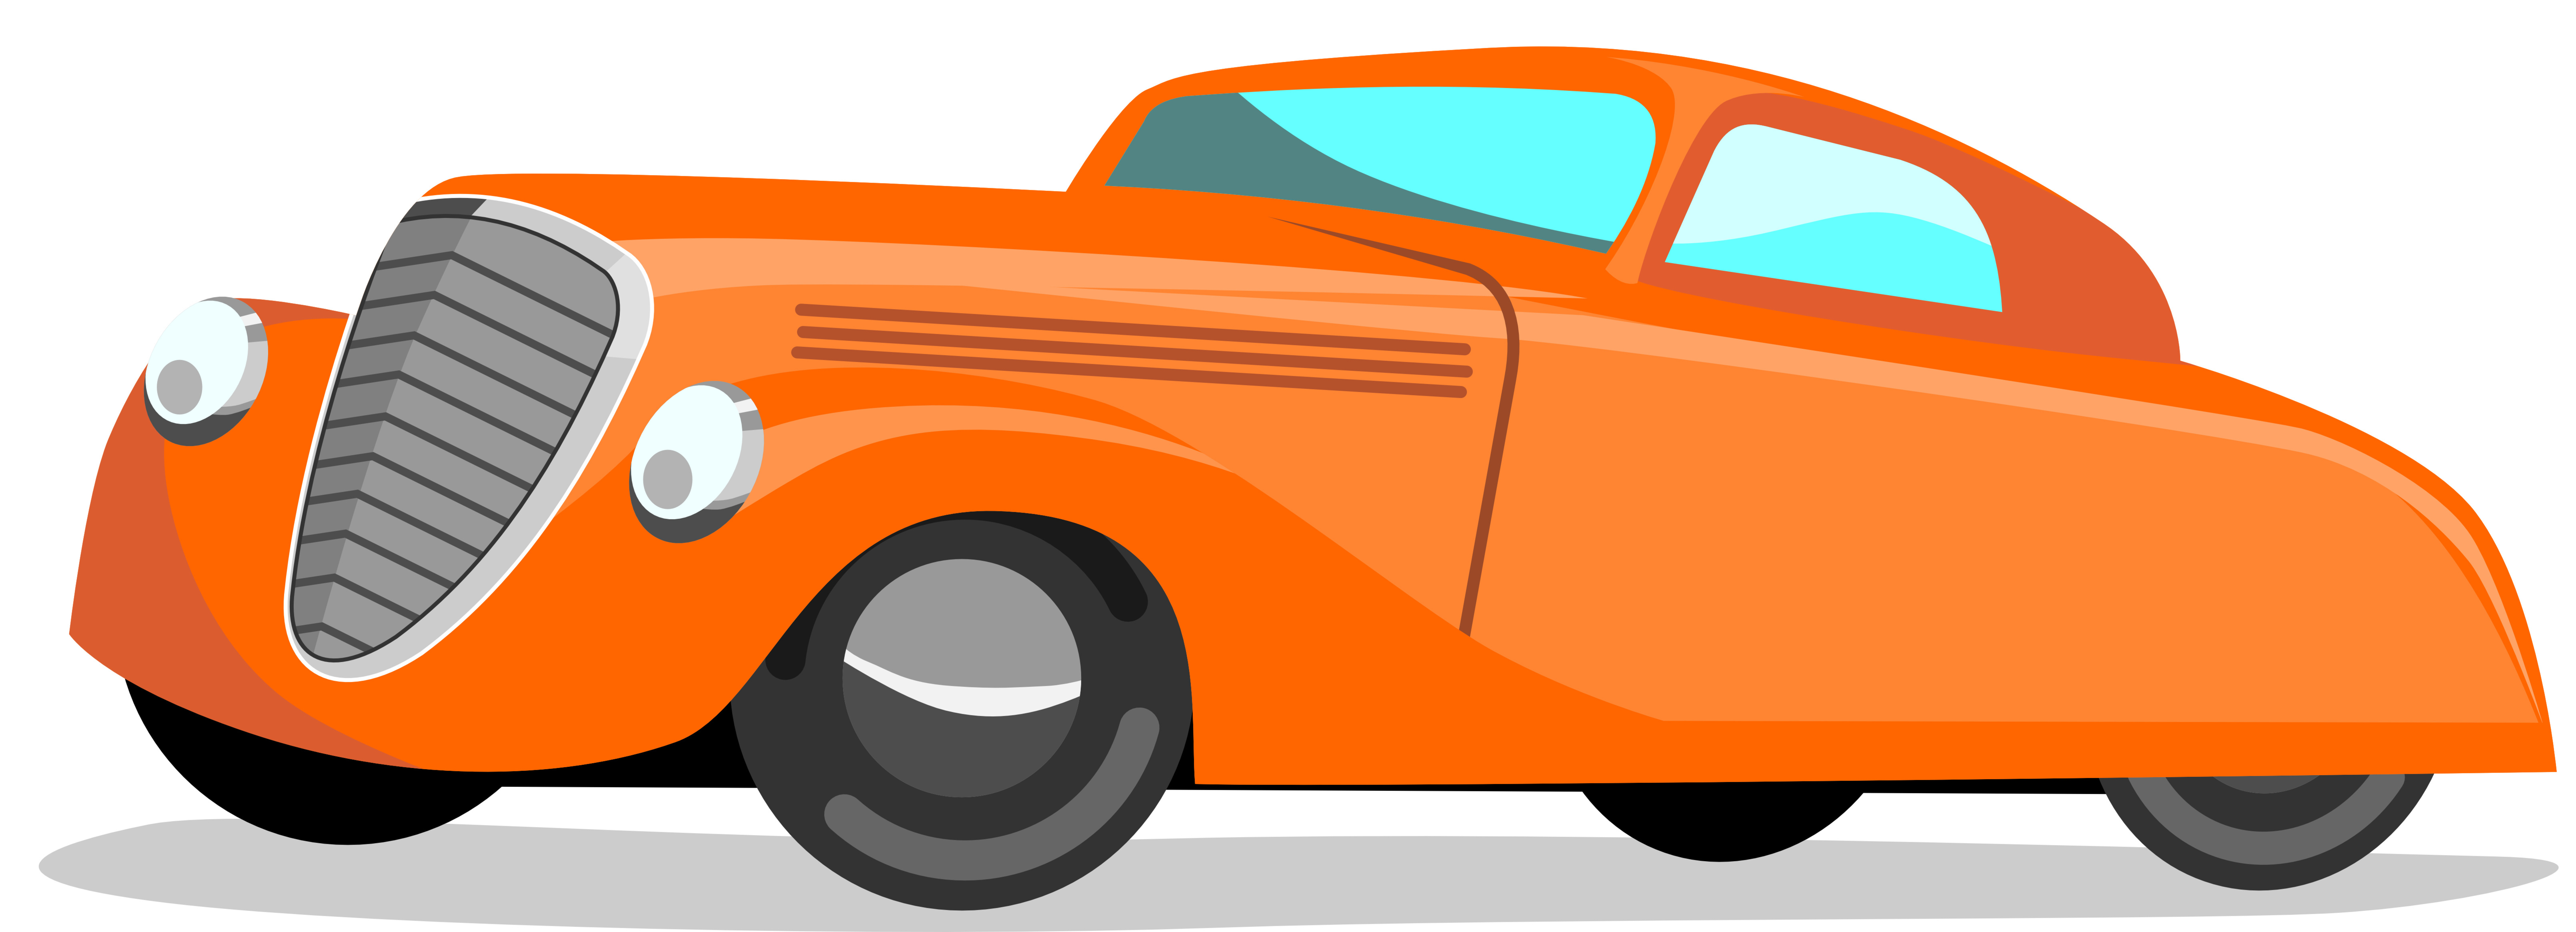 Free Cartoon Vehicle Cliparts, Download Free Cartoon Vehicle Cliparts